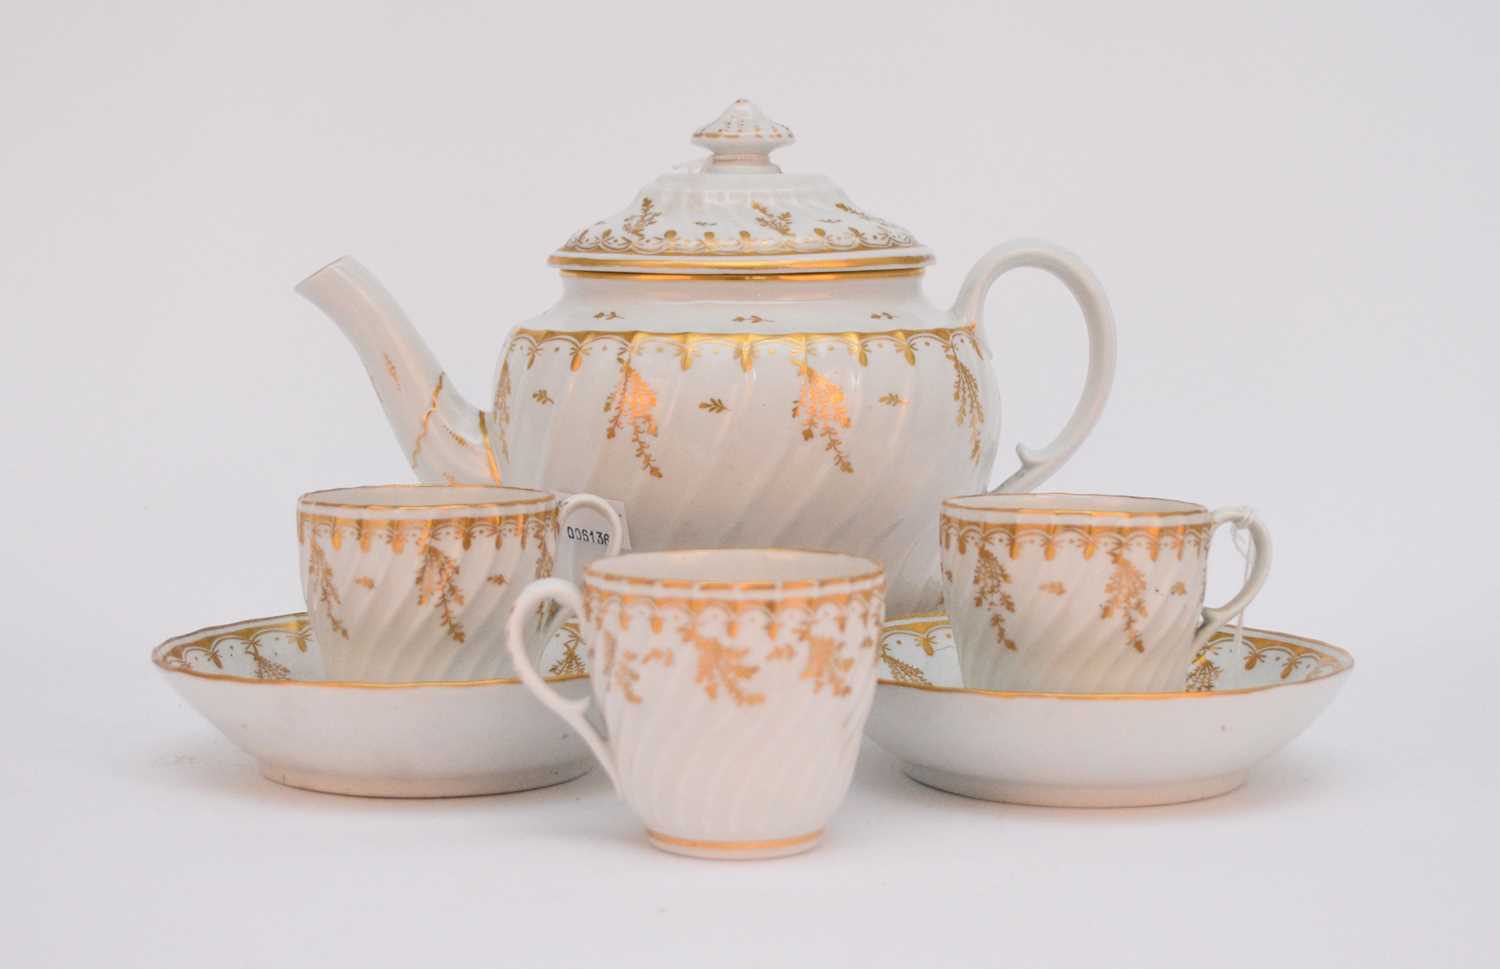 Lot 11 - Worcester and John Rose (Coalport) porcelain, late 18th/early 19th century